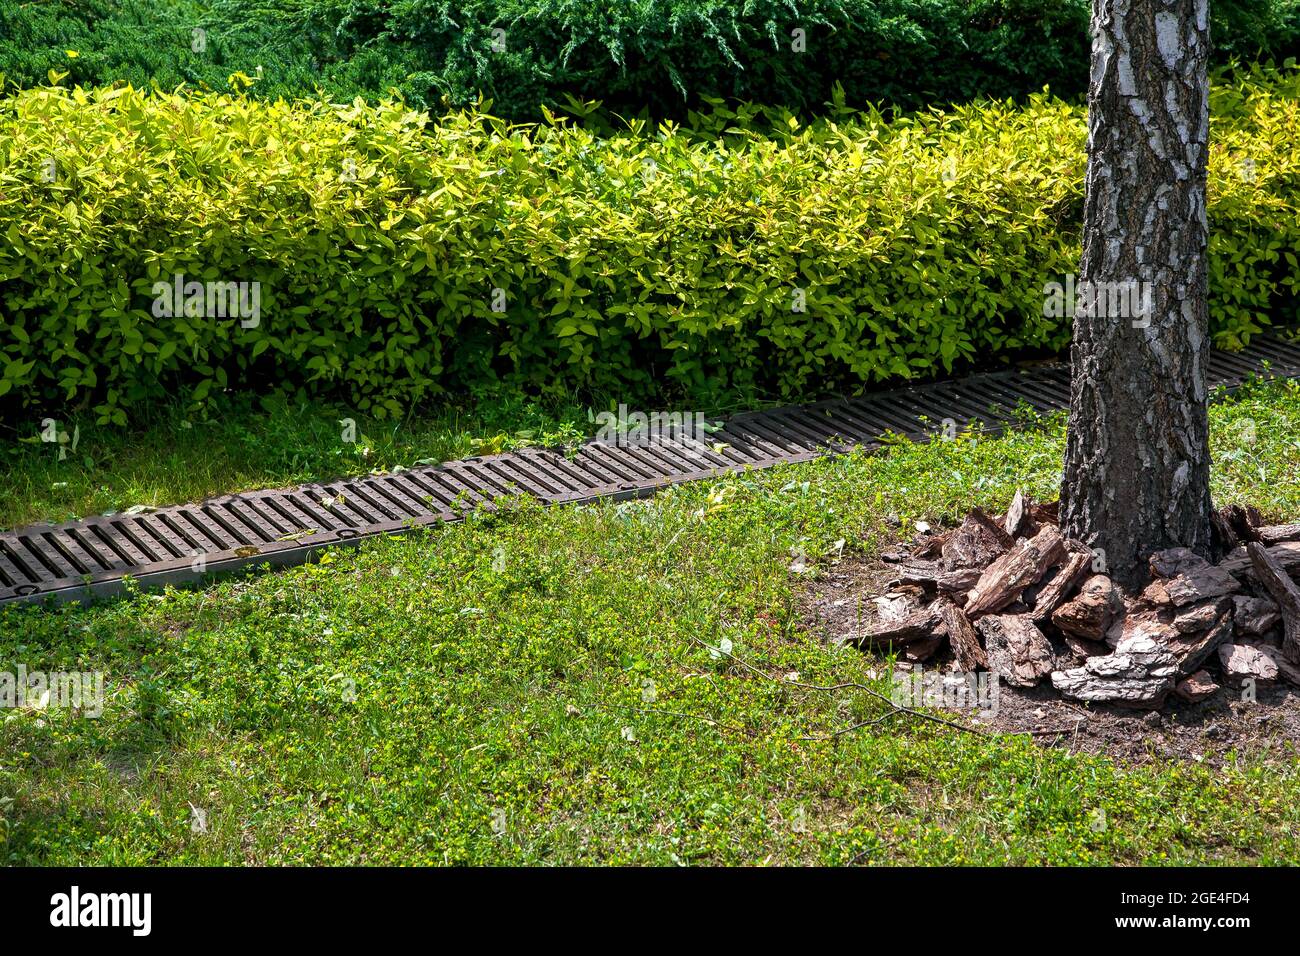 grate drainage system on lawn with green grass and bushes in backyard garden with tree trunk bark and mulching, rainwater drainage system in park amon Stock Photo